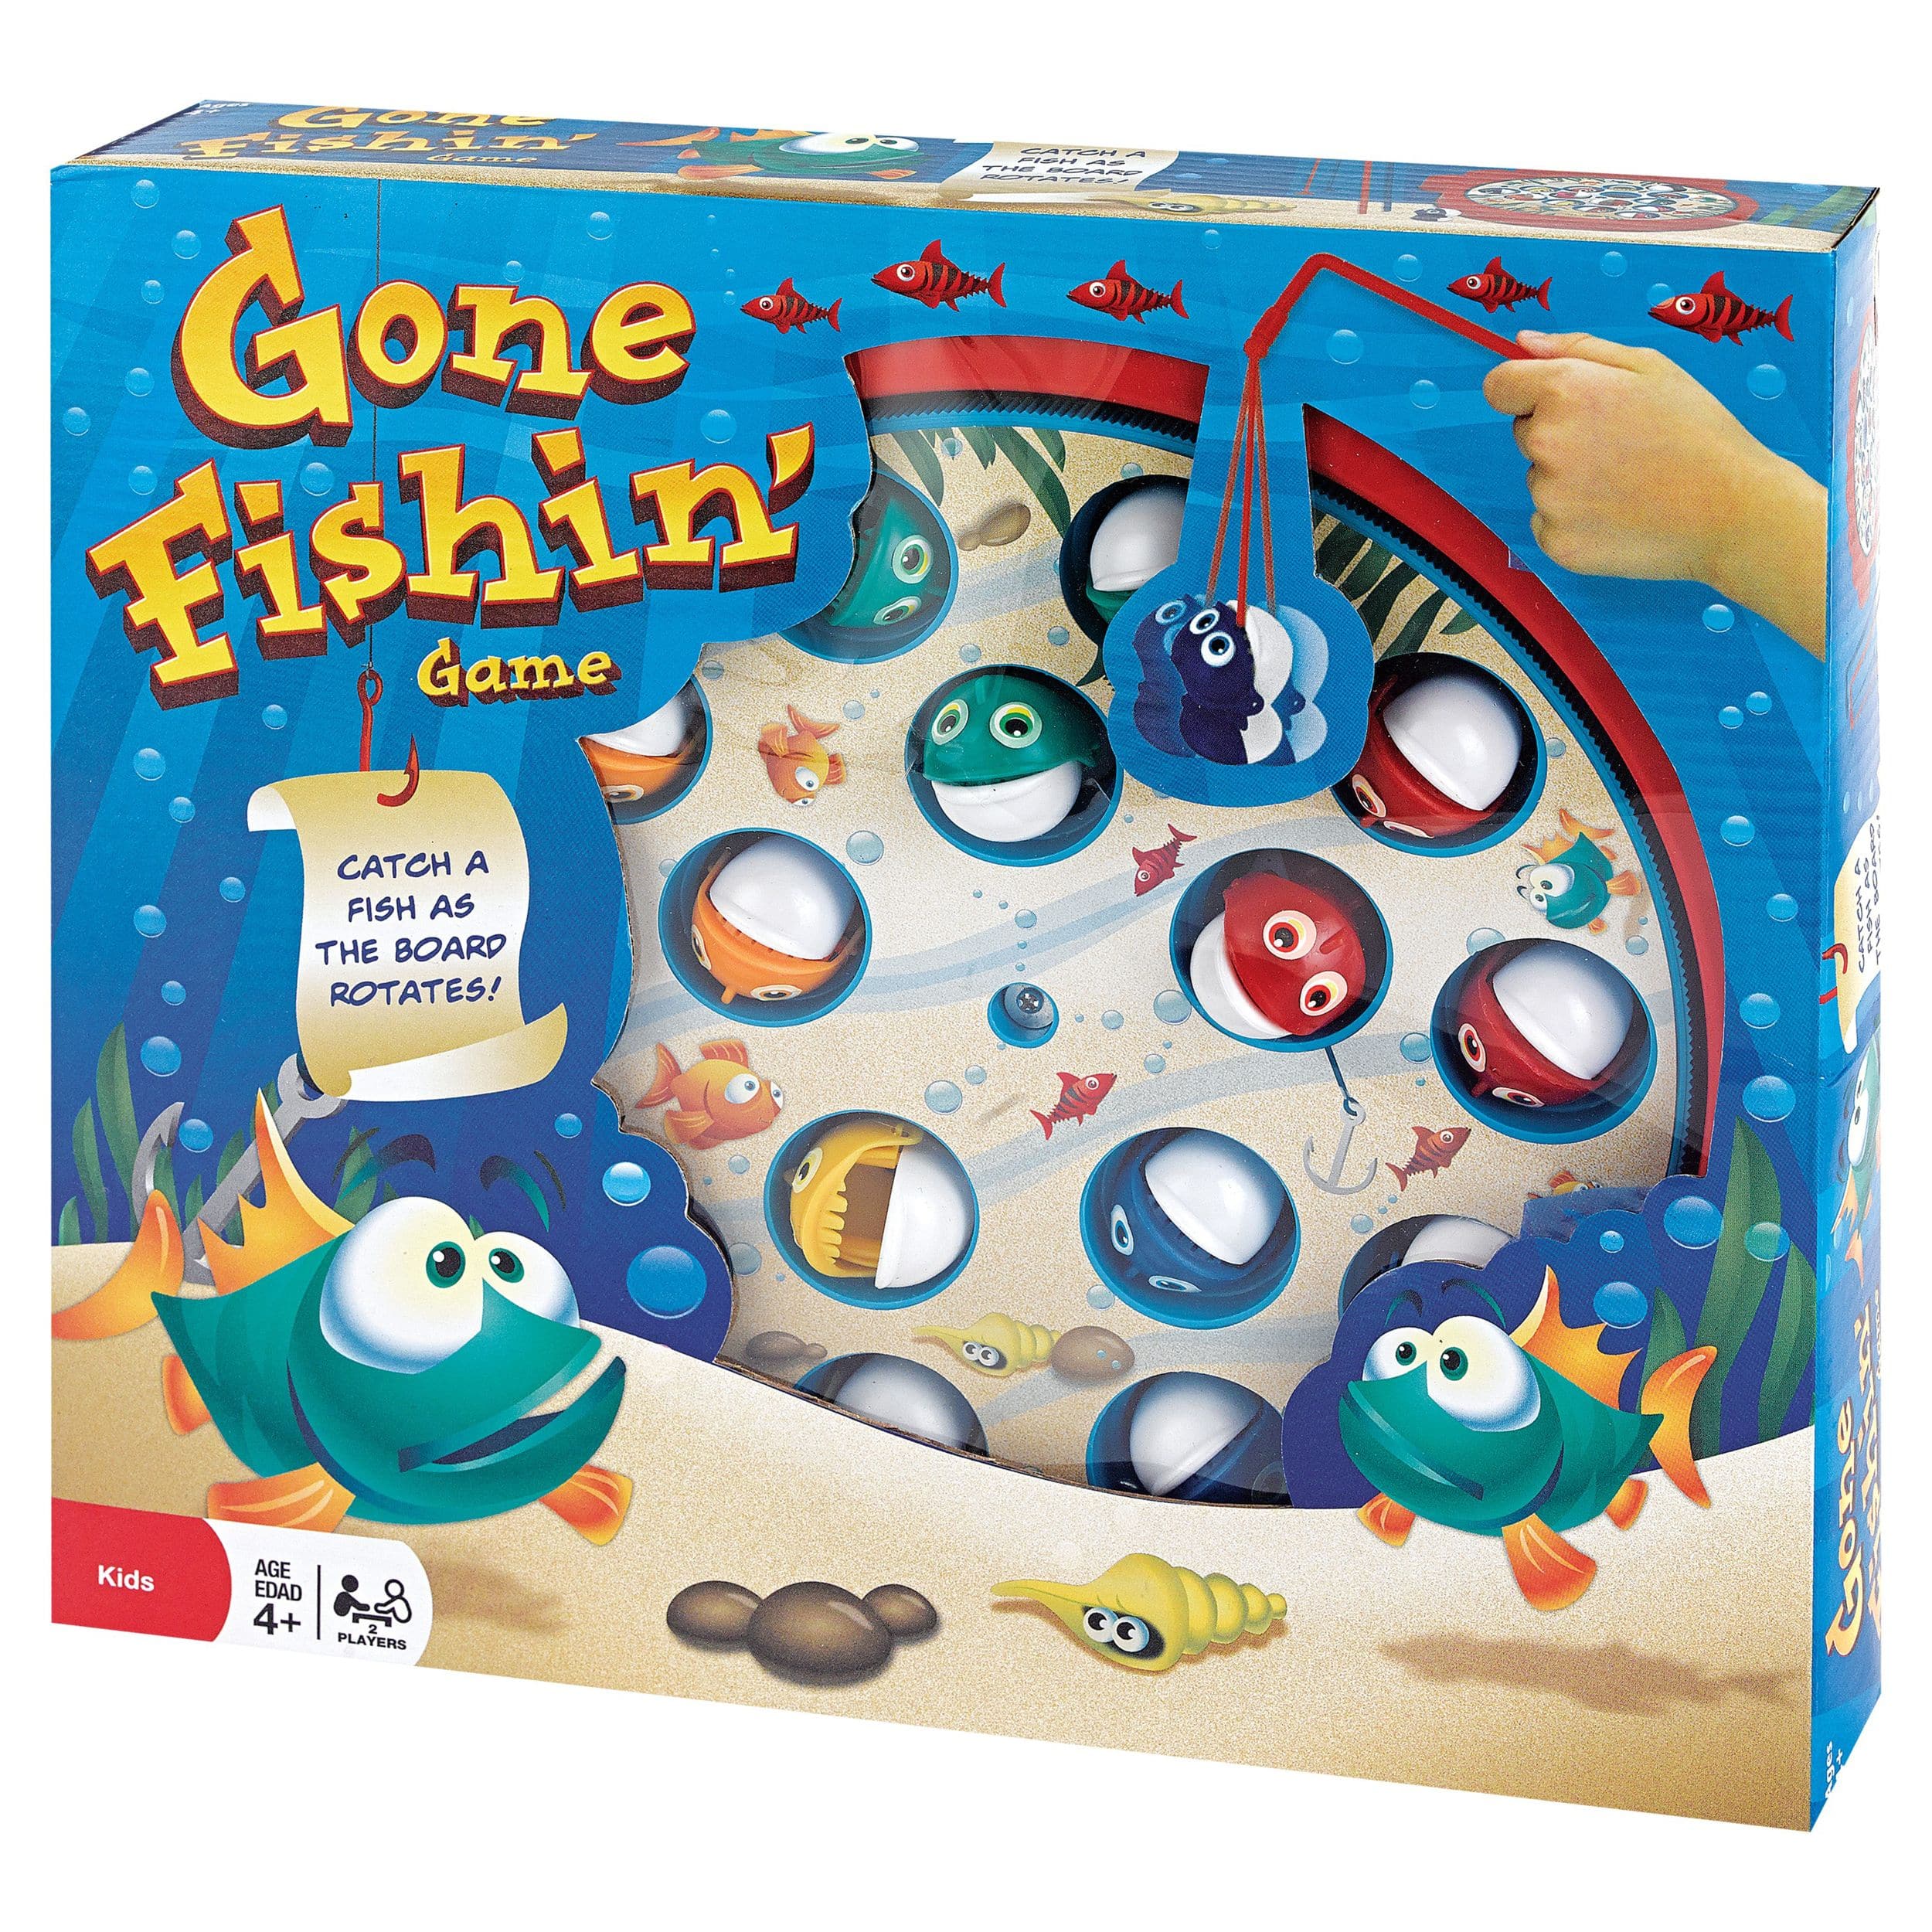 Ambassador Games - The Fishing Game - Available Now at KMART! The